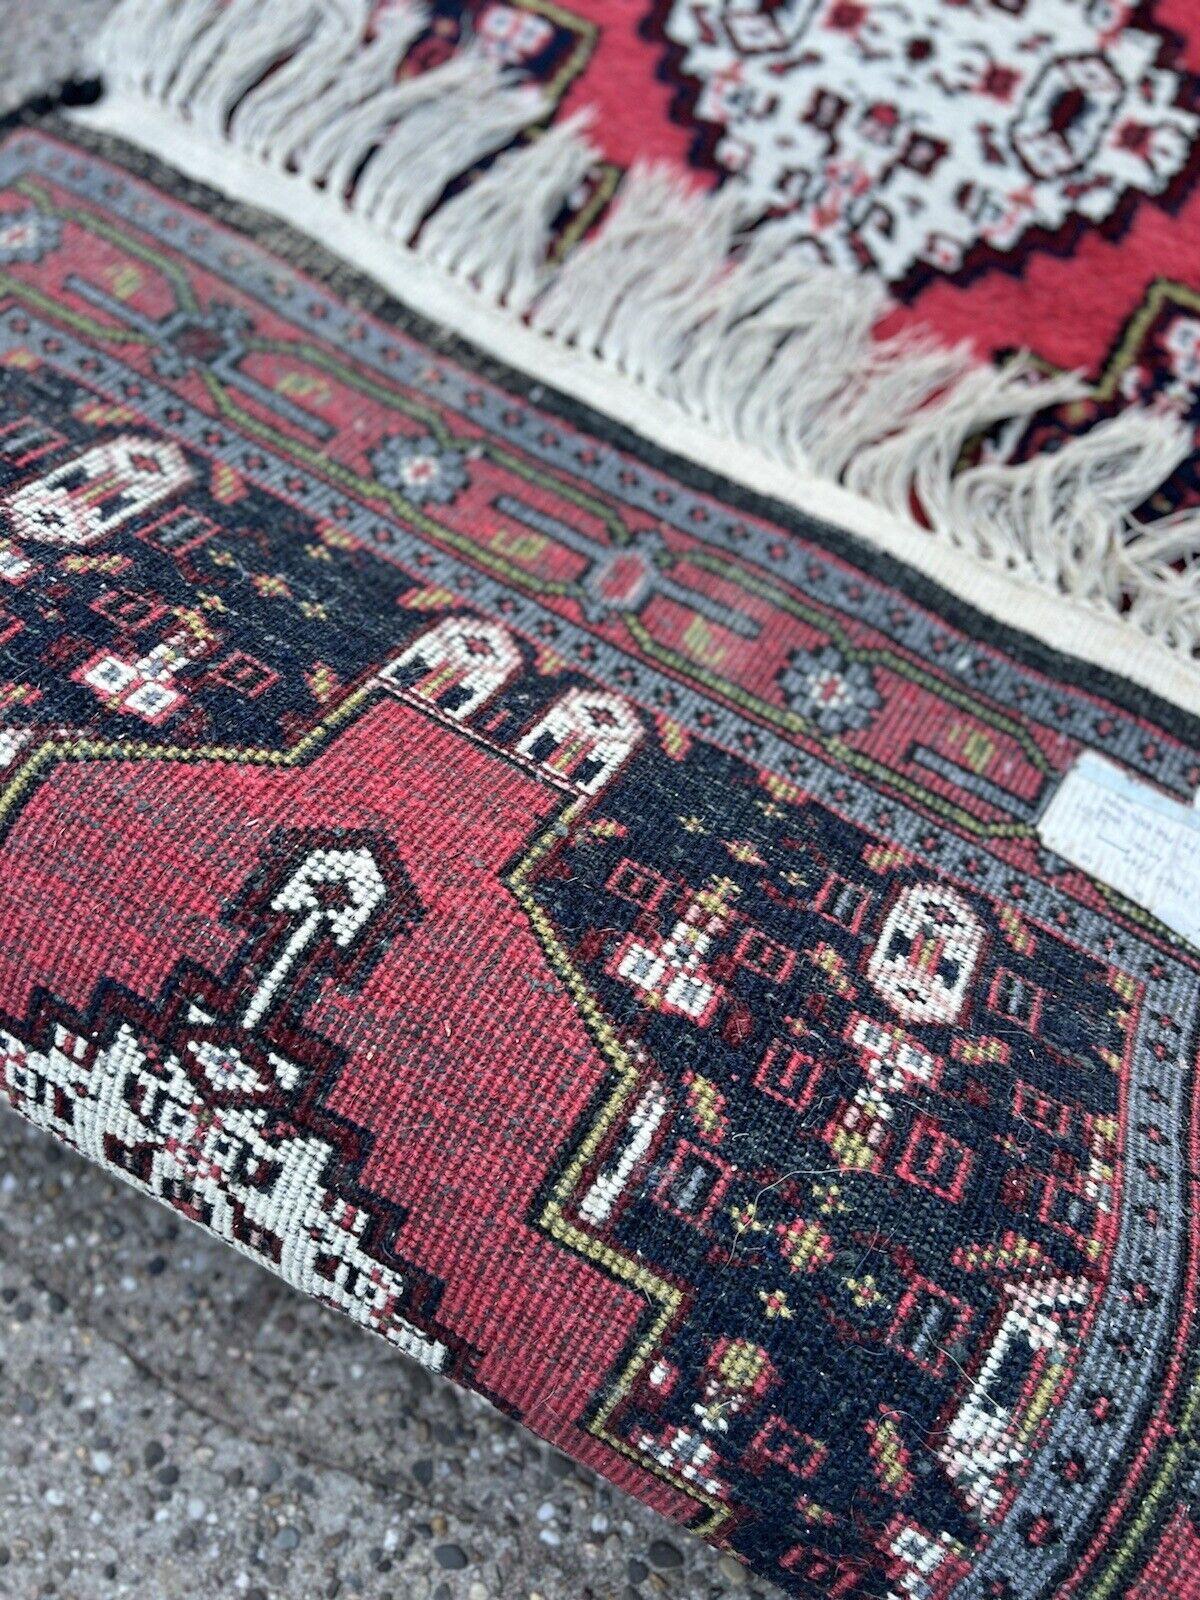 Handmade Vintage Persian Style Hamadan Rug 2.1' x 4.4', 1970s - 1S50 In Good Condition For Sale In Bordeaux, FR